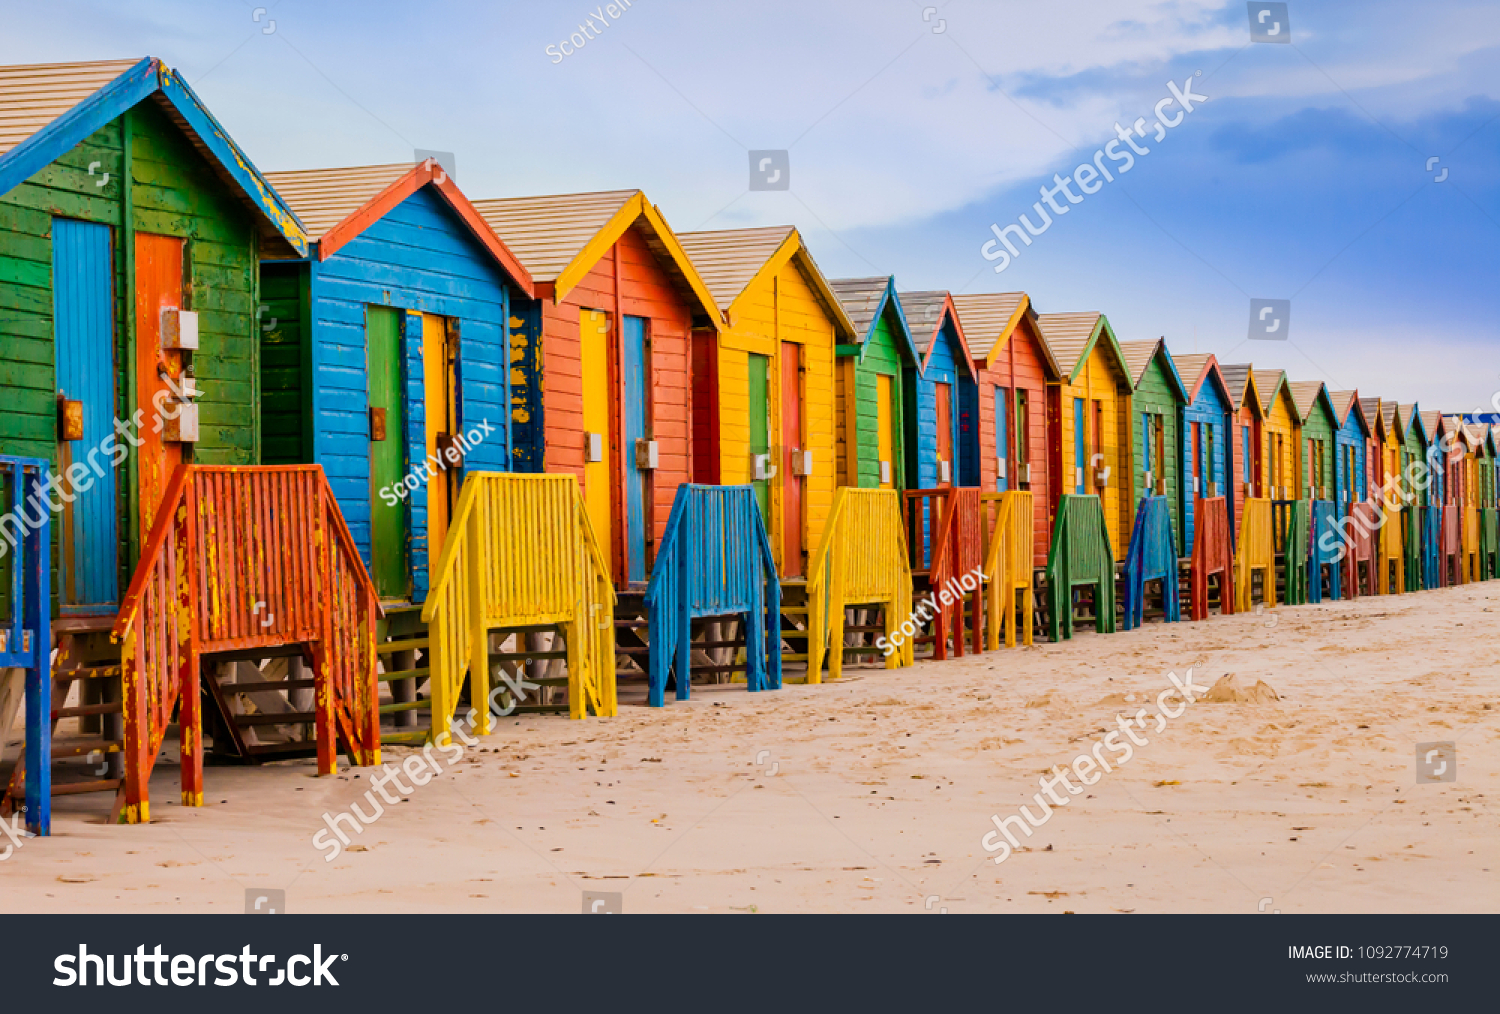 Row of colorful bathing huts in Muizenberg beach, Cape Town, South Africa

 #1092774719